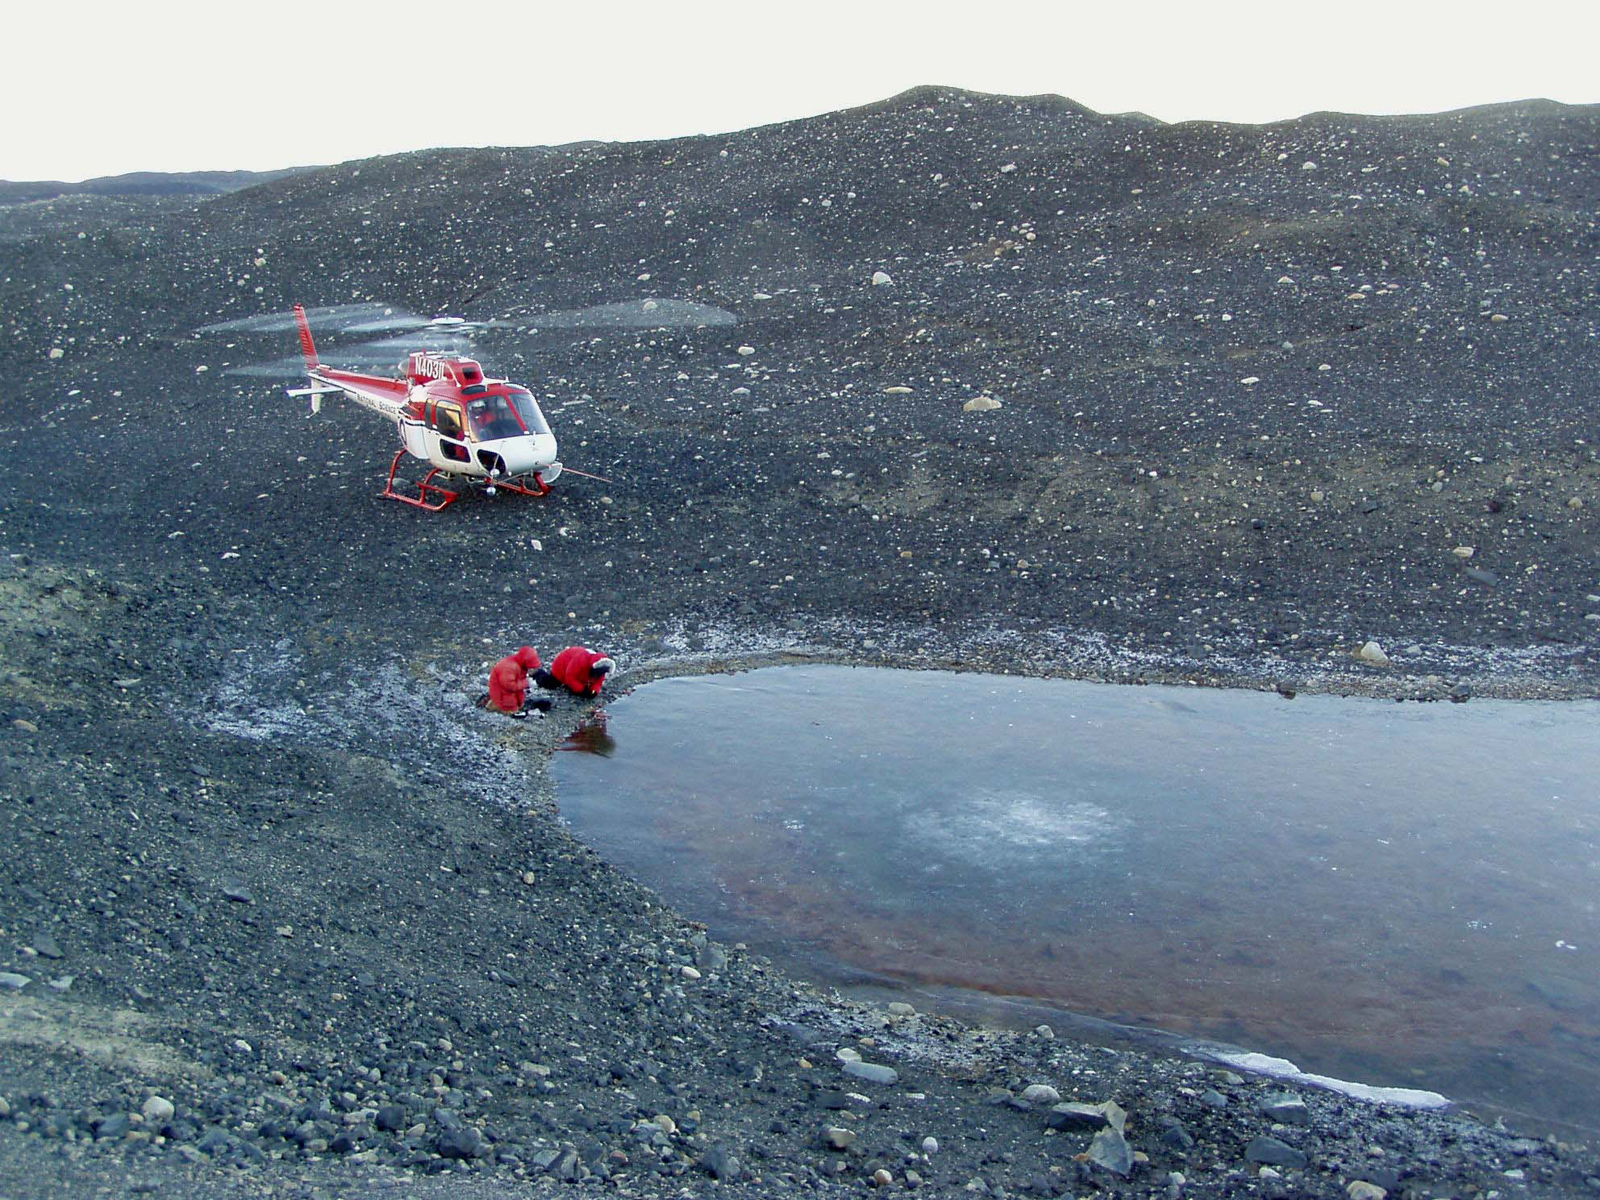 Two people kneel near a small lake while a helicopter waits nearby.